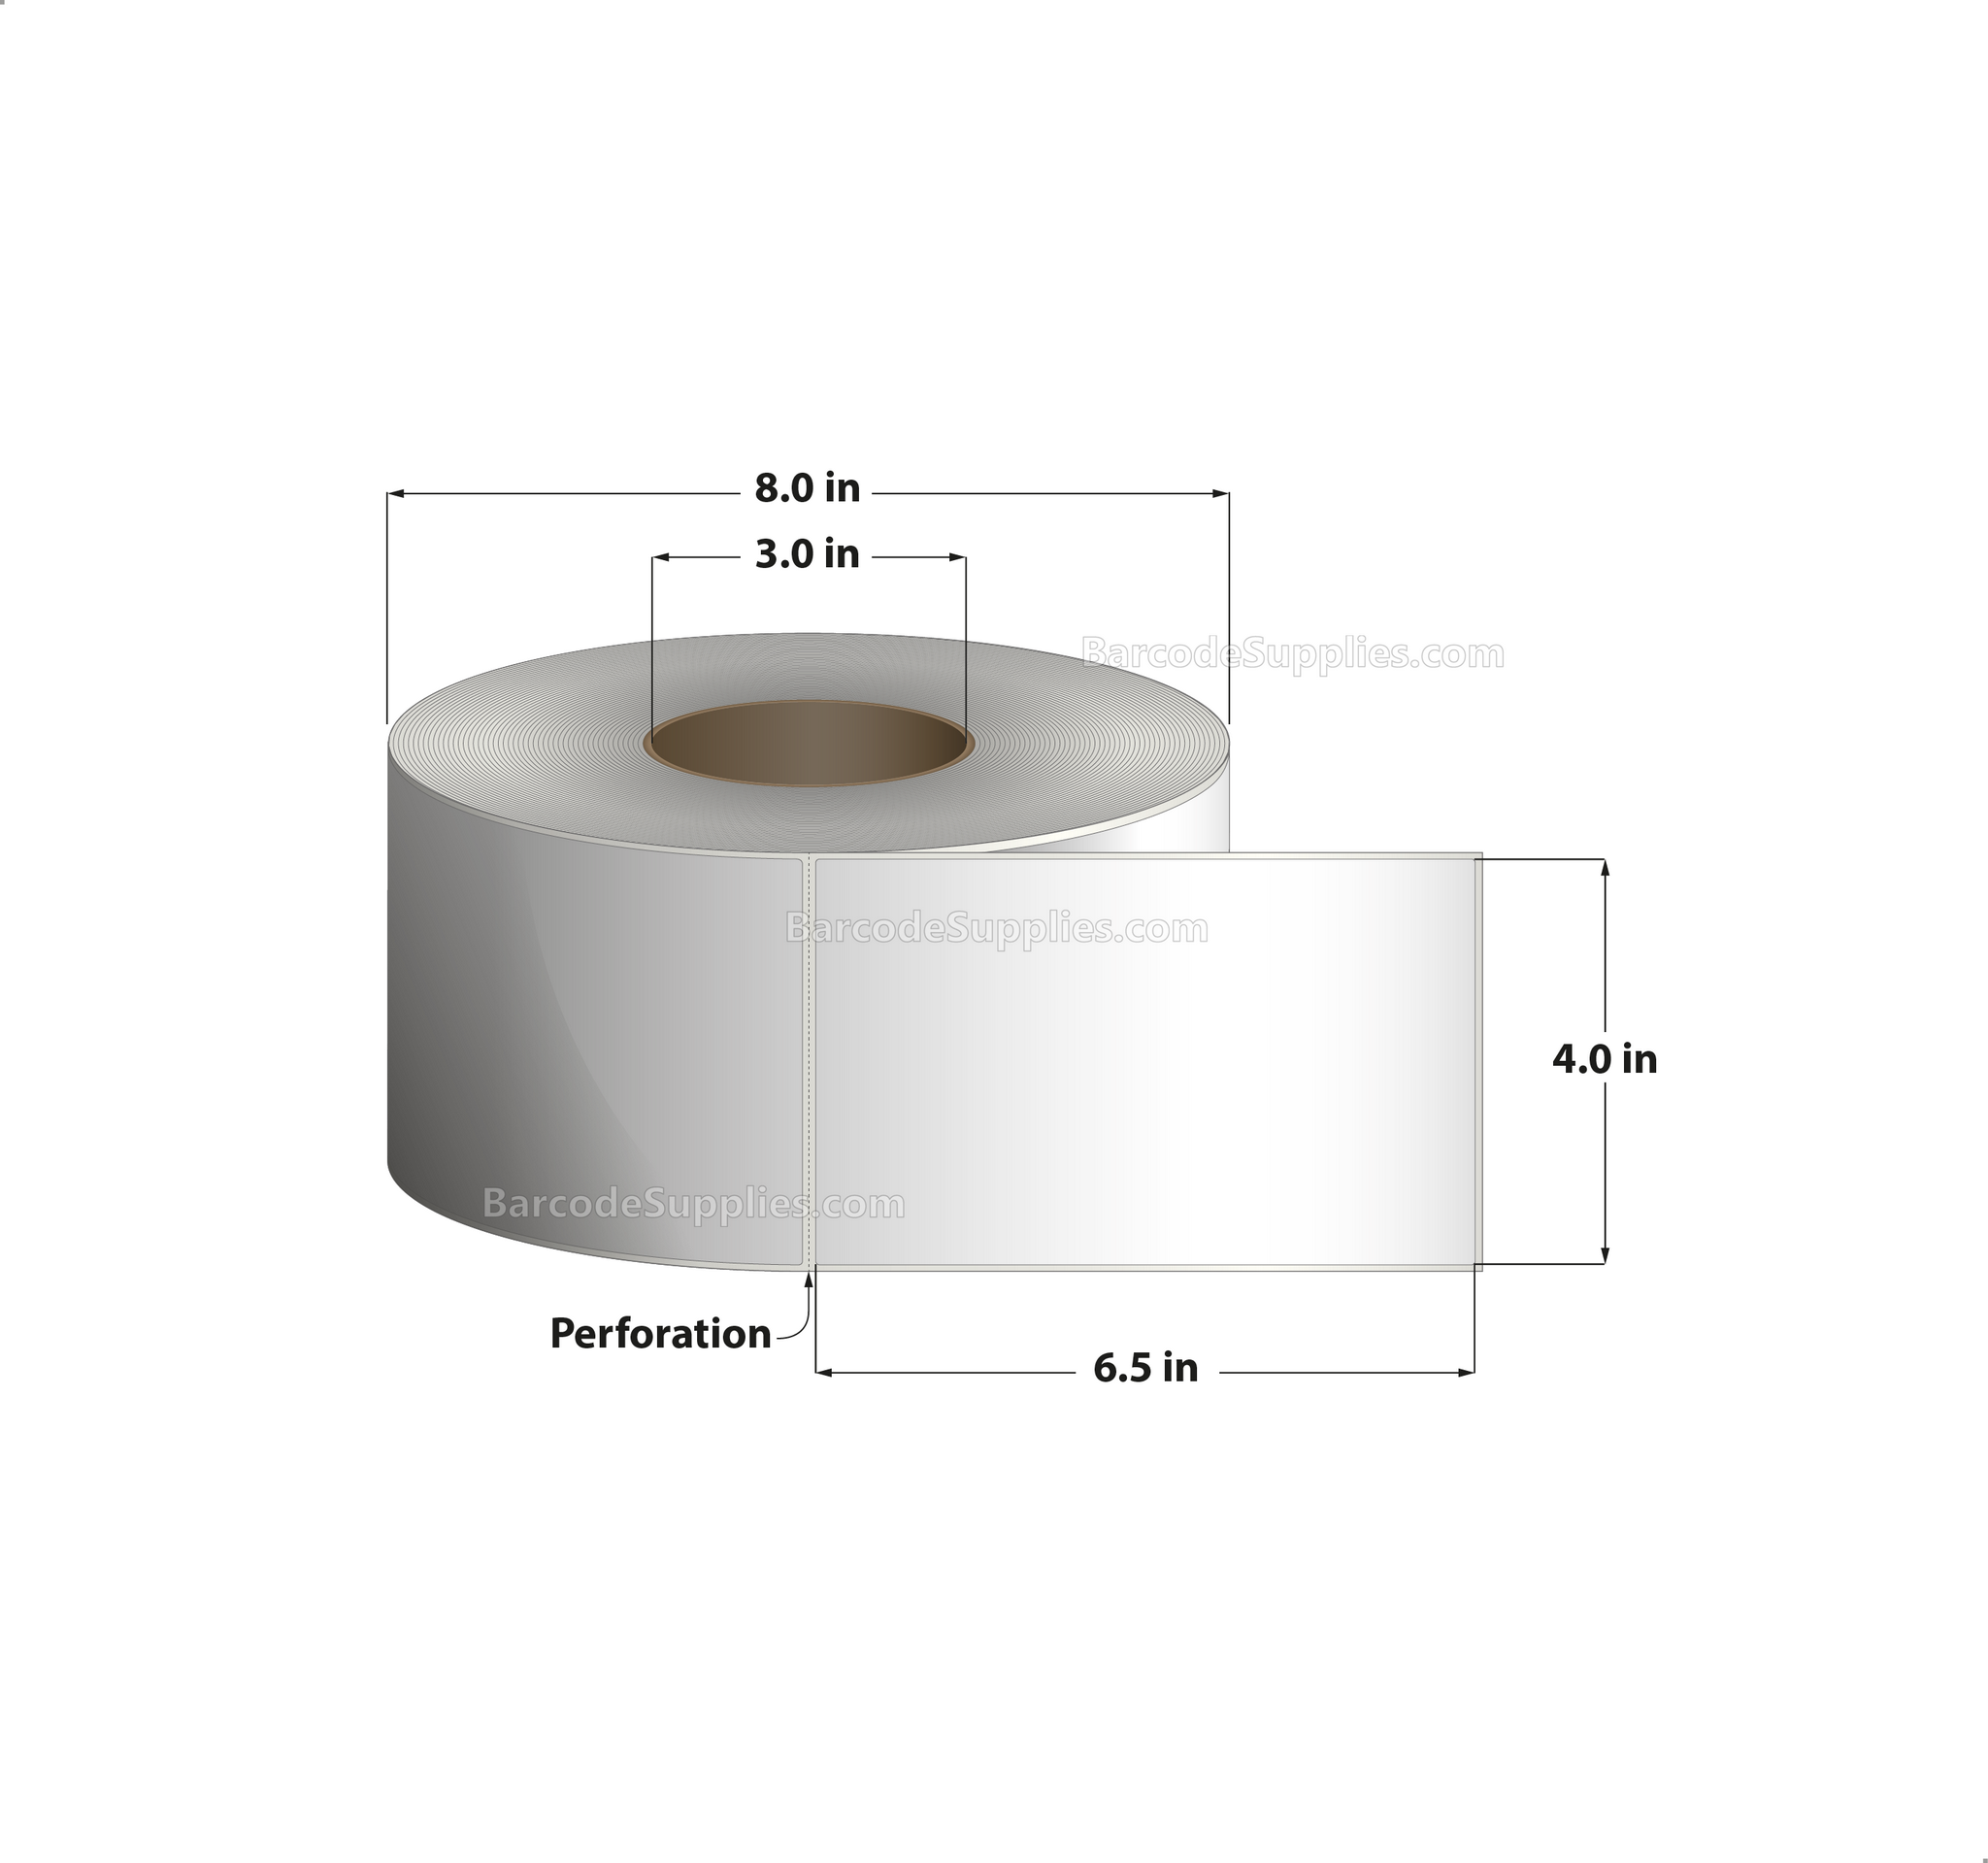 4 x 6.5 Thermal Transfer White Labels With Rubber Adhesive - Perforated - 900 Labels Per Roll - Carton Of 4 Rolls - 3600 Labels Total - MPN: CTT400650-3P